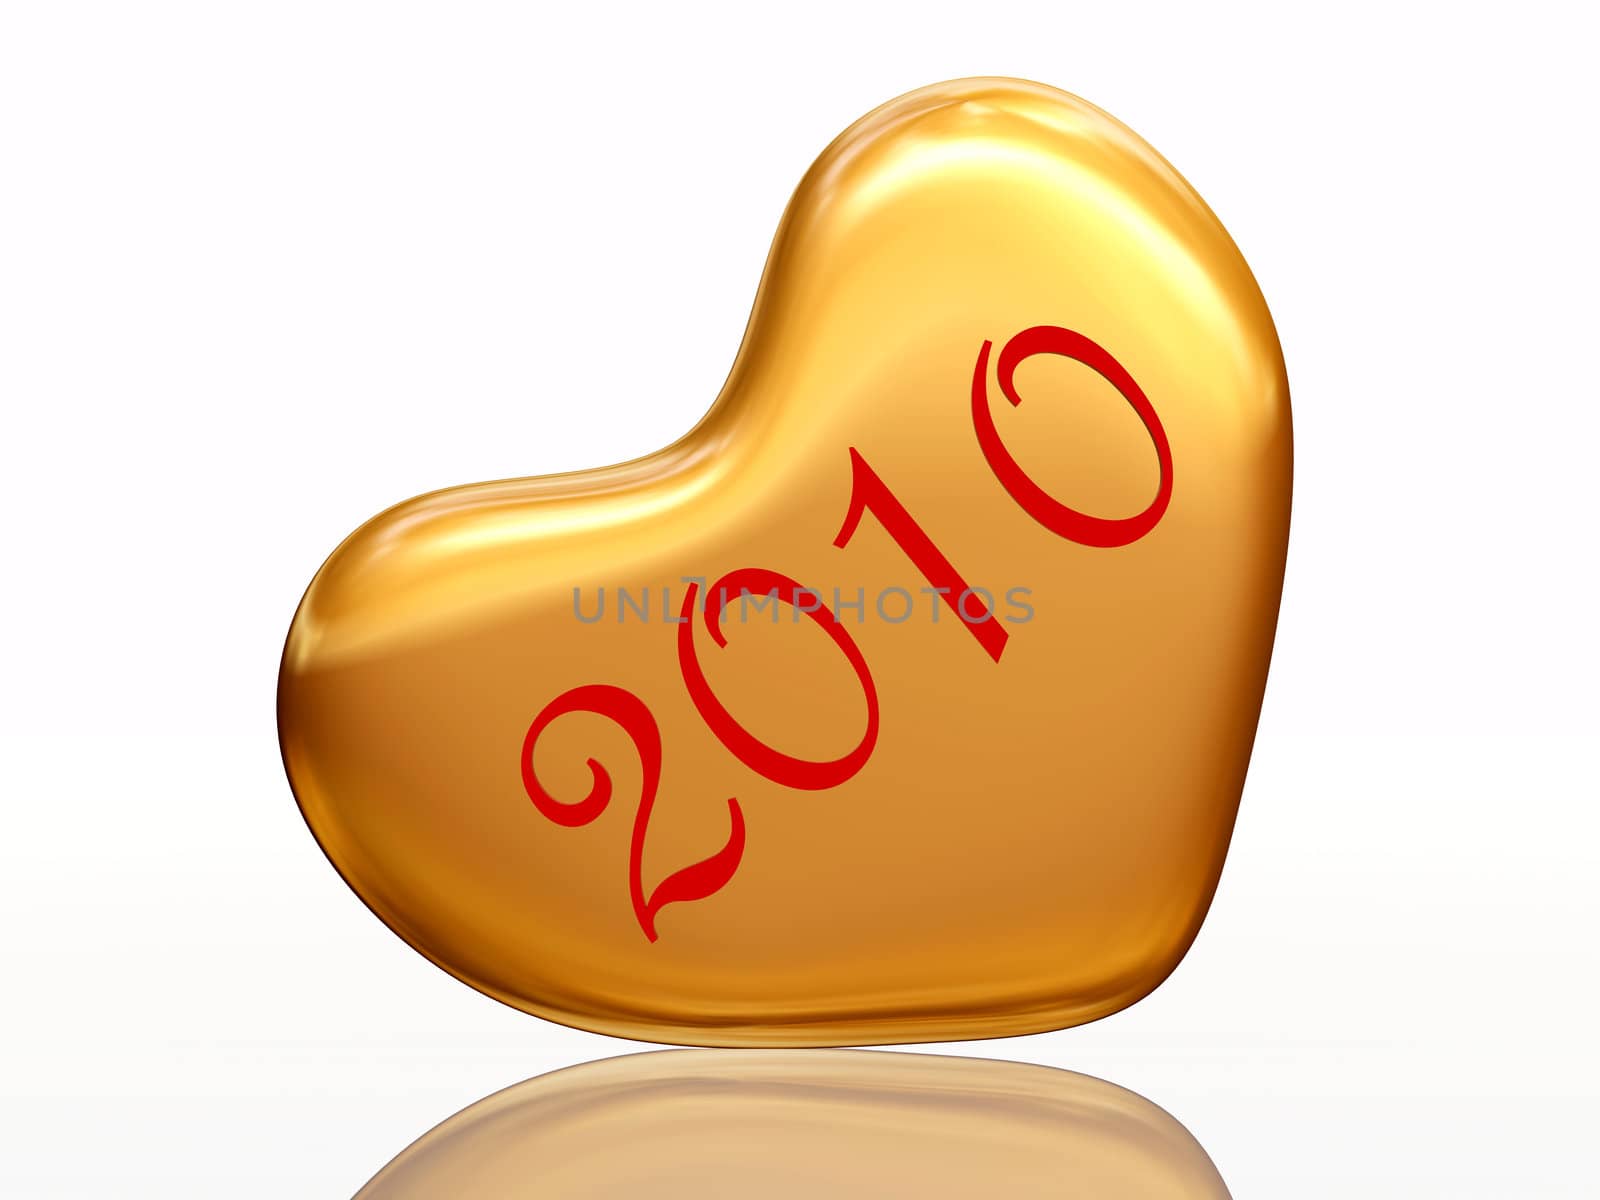 3d golden heart with numerical 2010 inside
